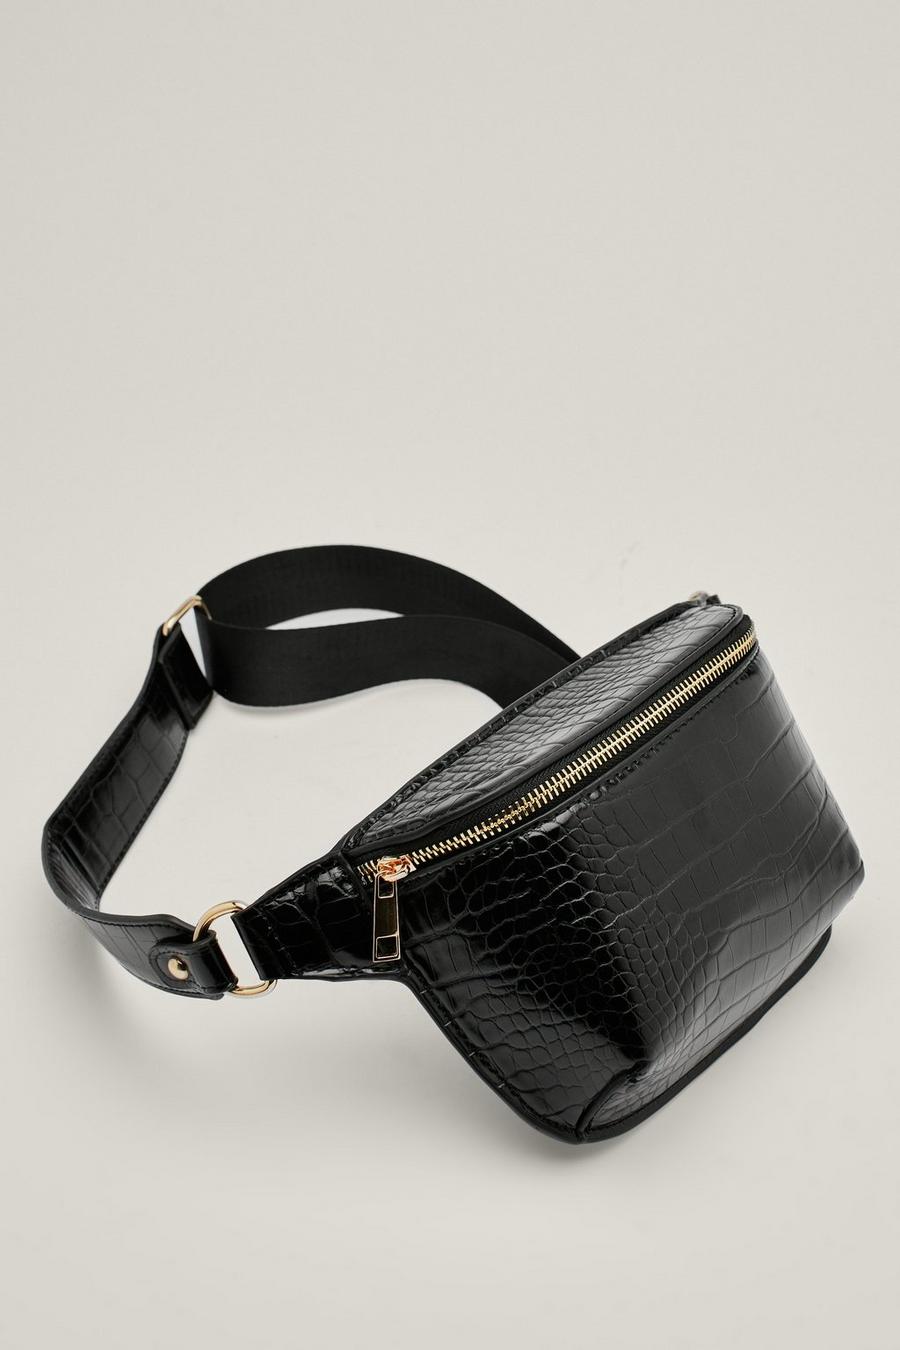 Croc Faux Leather Structured Fanny Pack